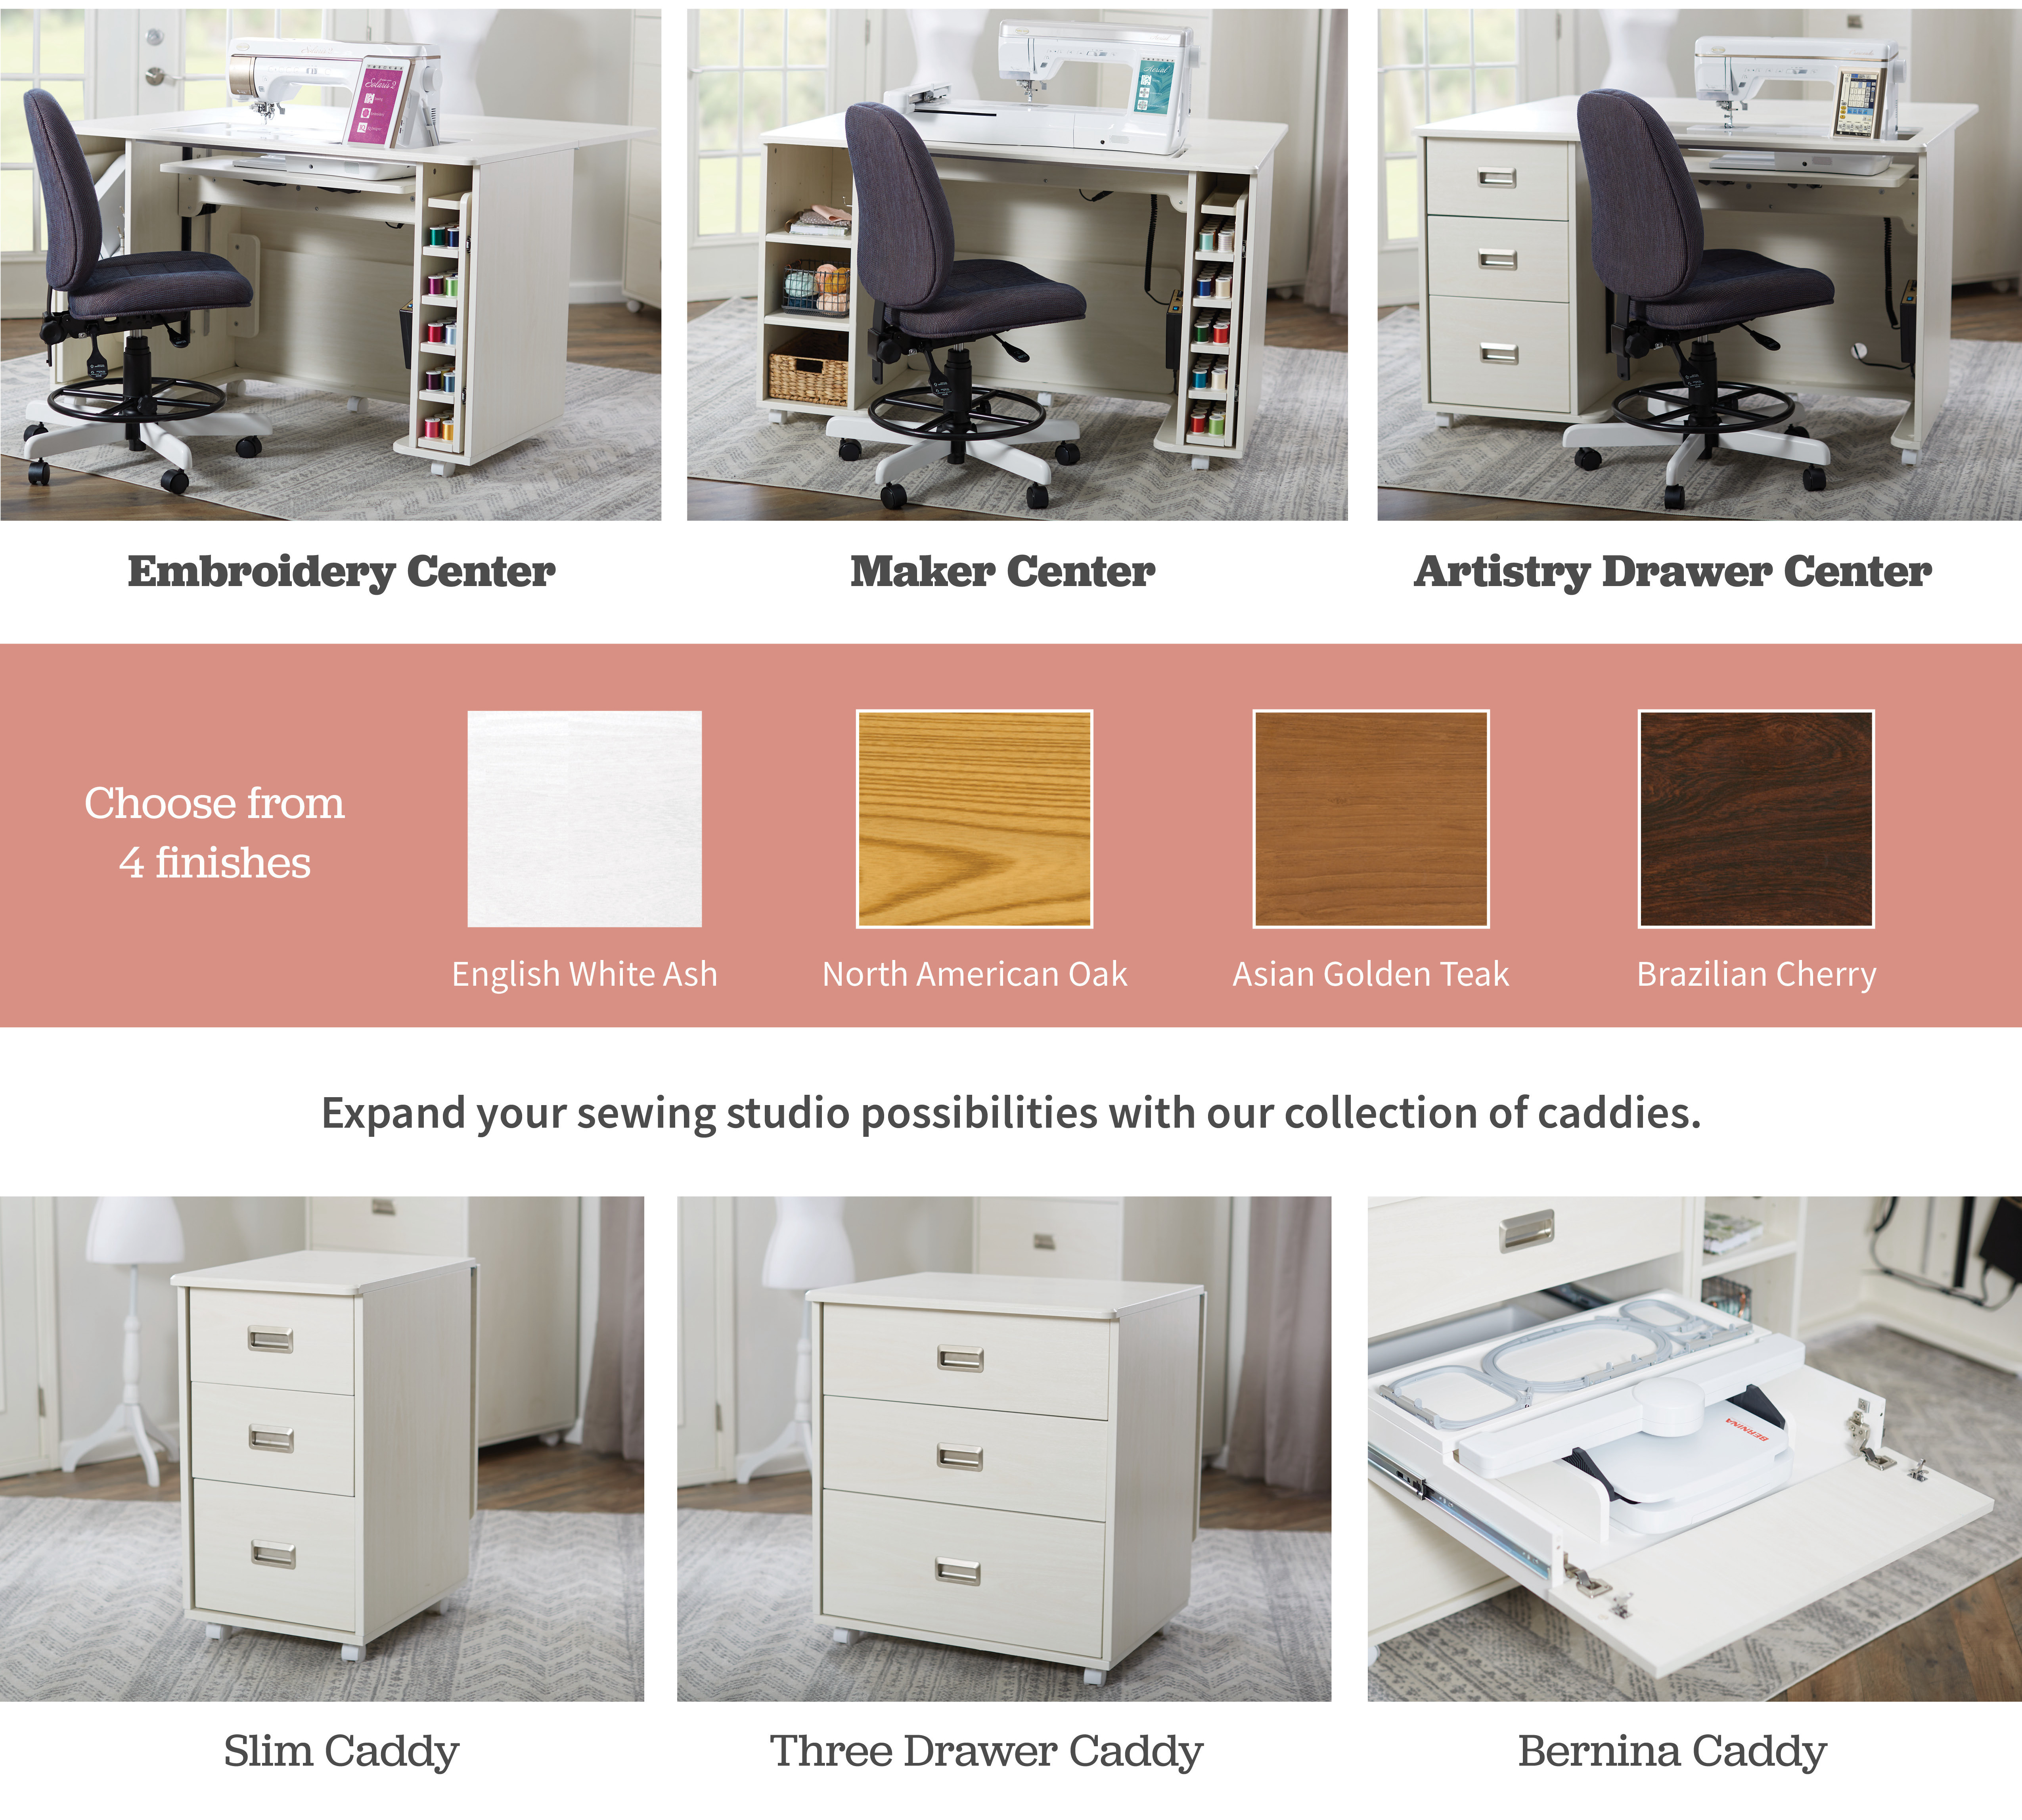 koala Embroidery Center. Maker Center. Artistry Drawer Center. Choose from 4 finishes. English White Ash, North American Oak, Asian Golden Teak, Brazilian Cherry. Expand your sewing studio possibilities with our collection of caddies.  Slim Caddy, Three Drawer Caddy, Bernina Caddy